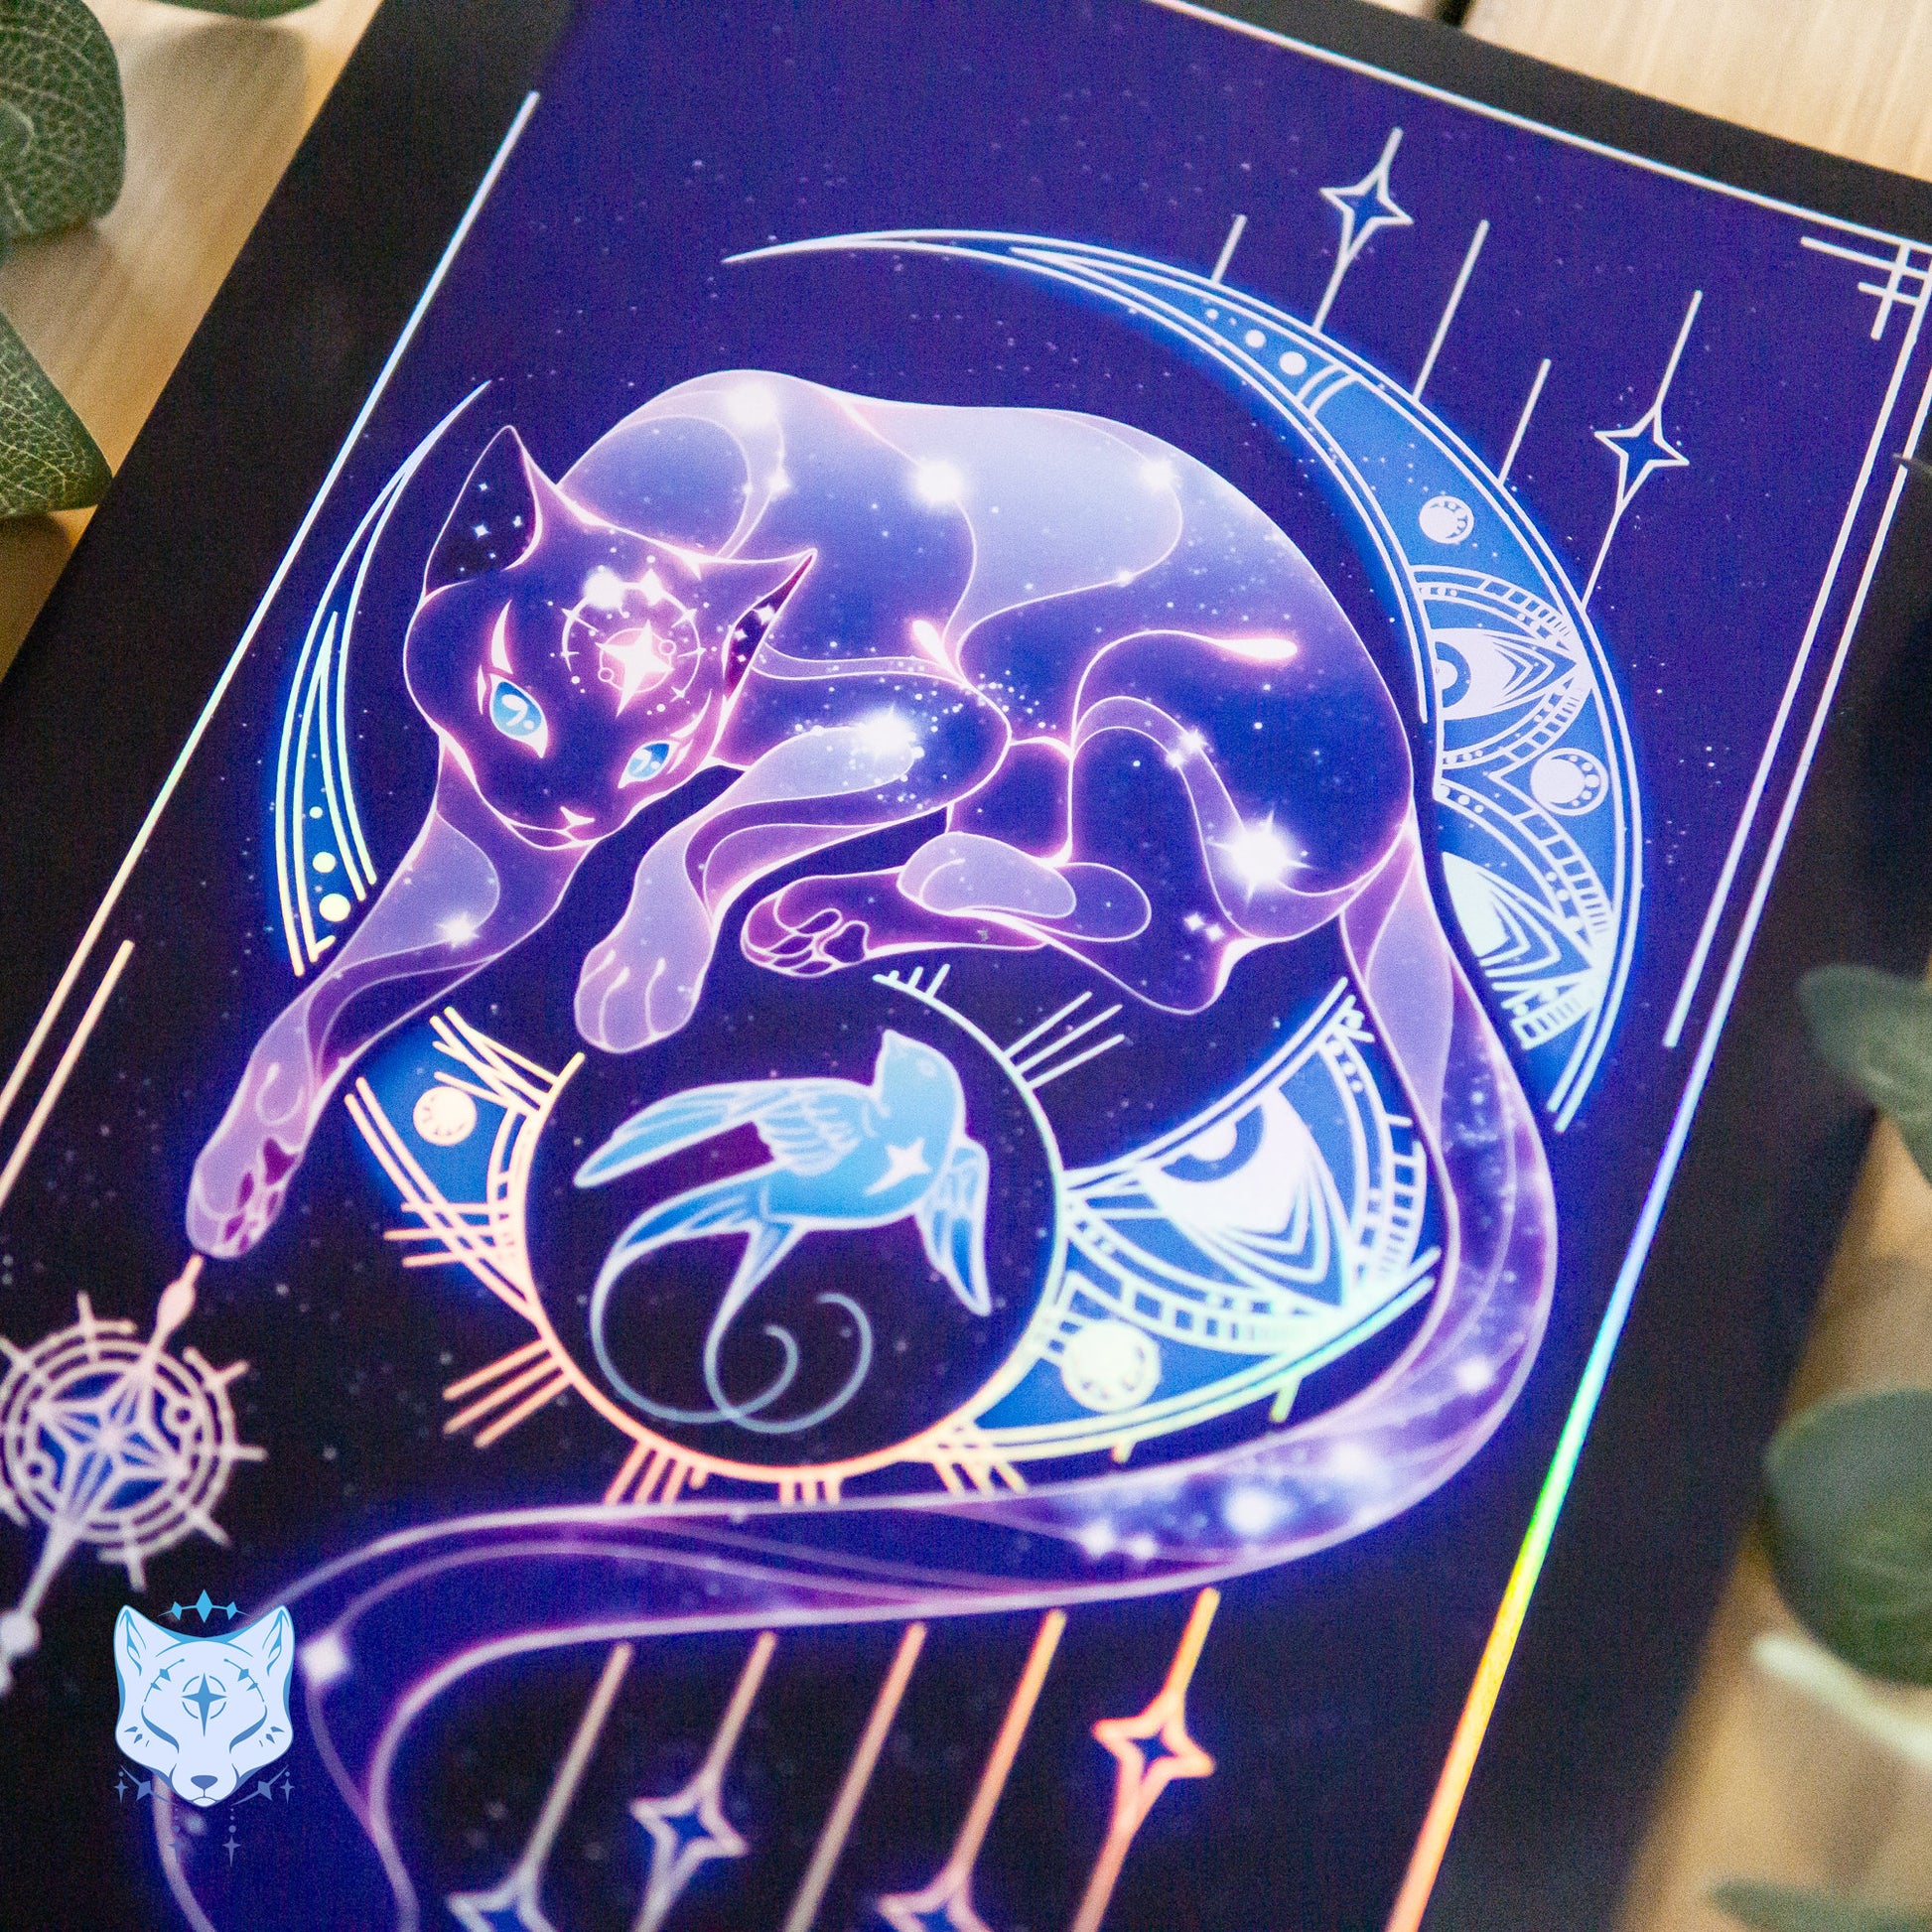 North Star Cat and the Stowaway Star - A4 Holographic Foil Print (PURPLE. Blue version also available)